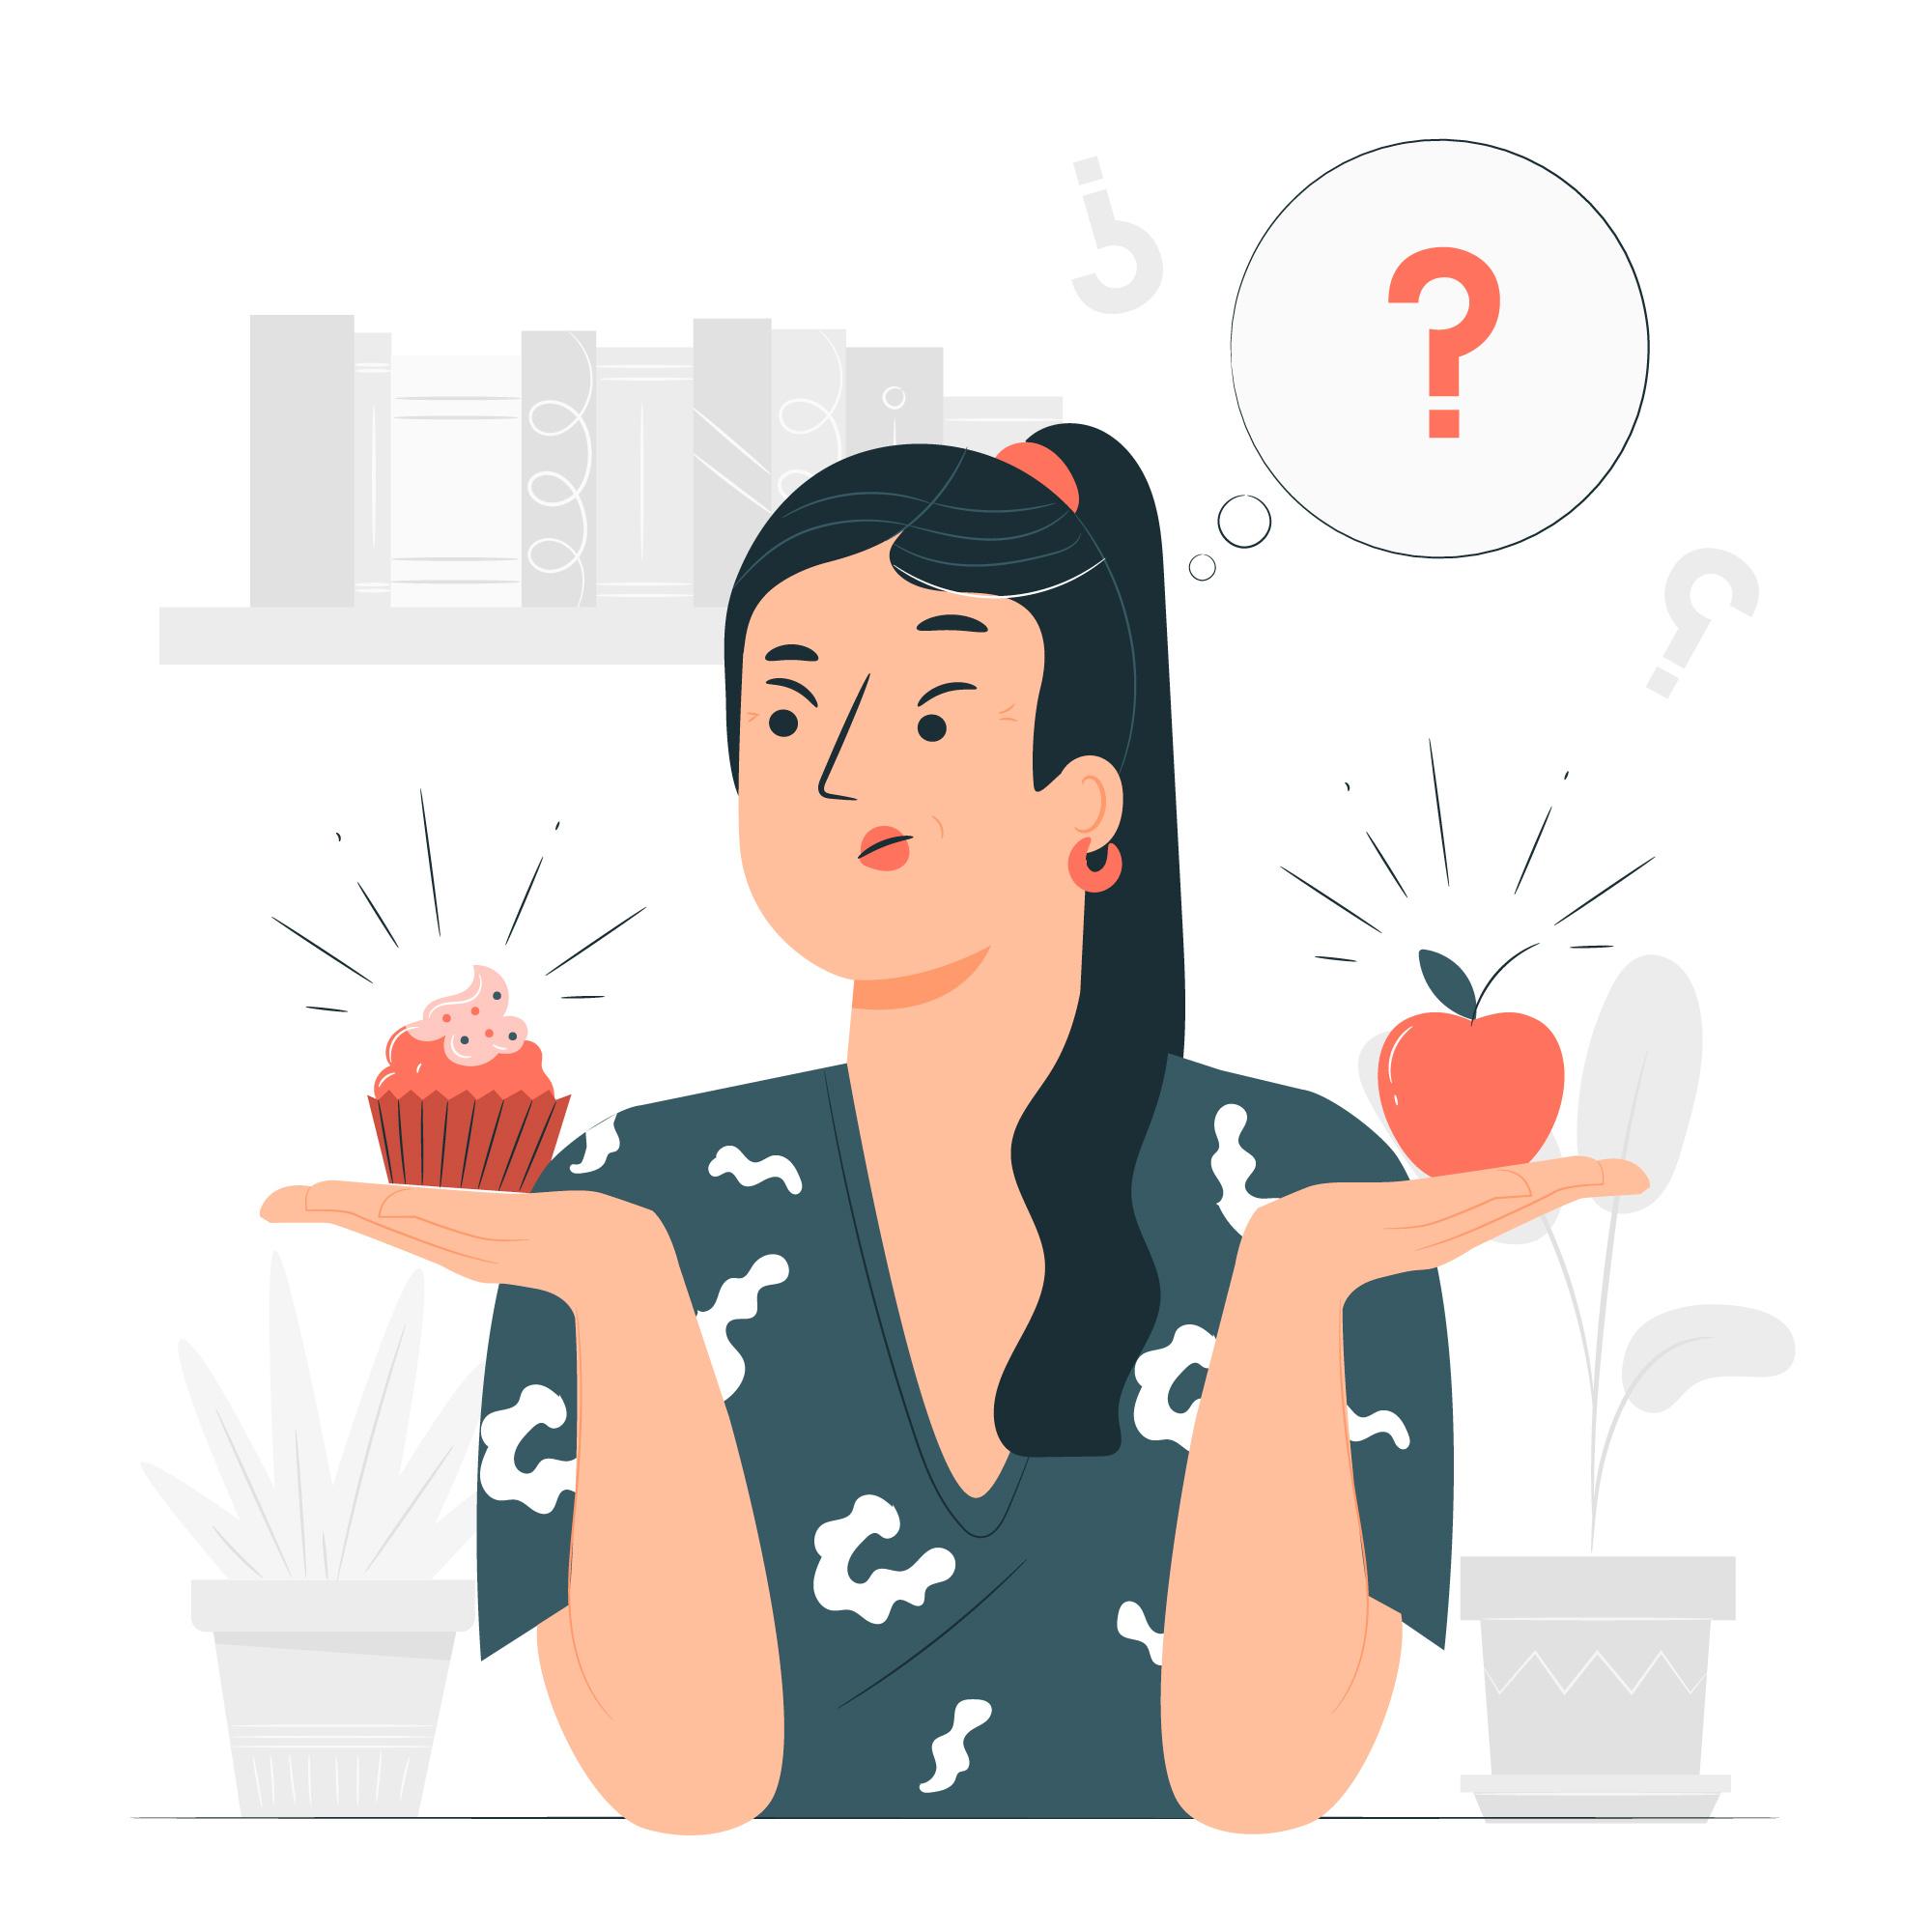 Woman with a question mark inside a thought bubble decides between a cupcake or an apple